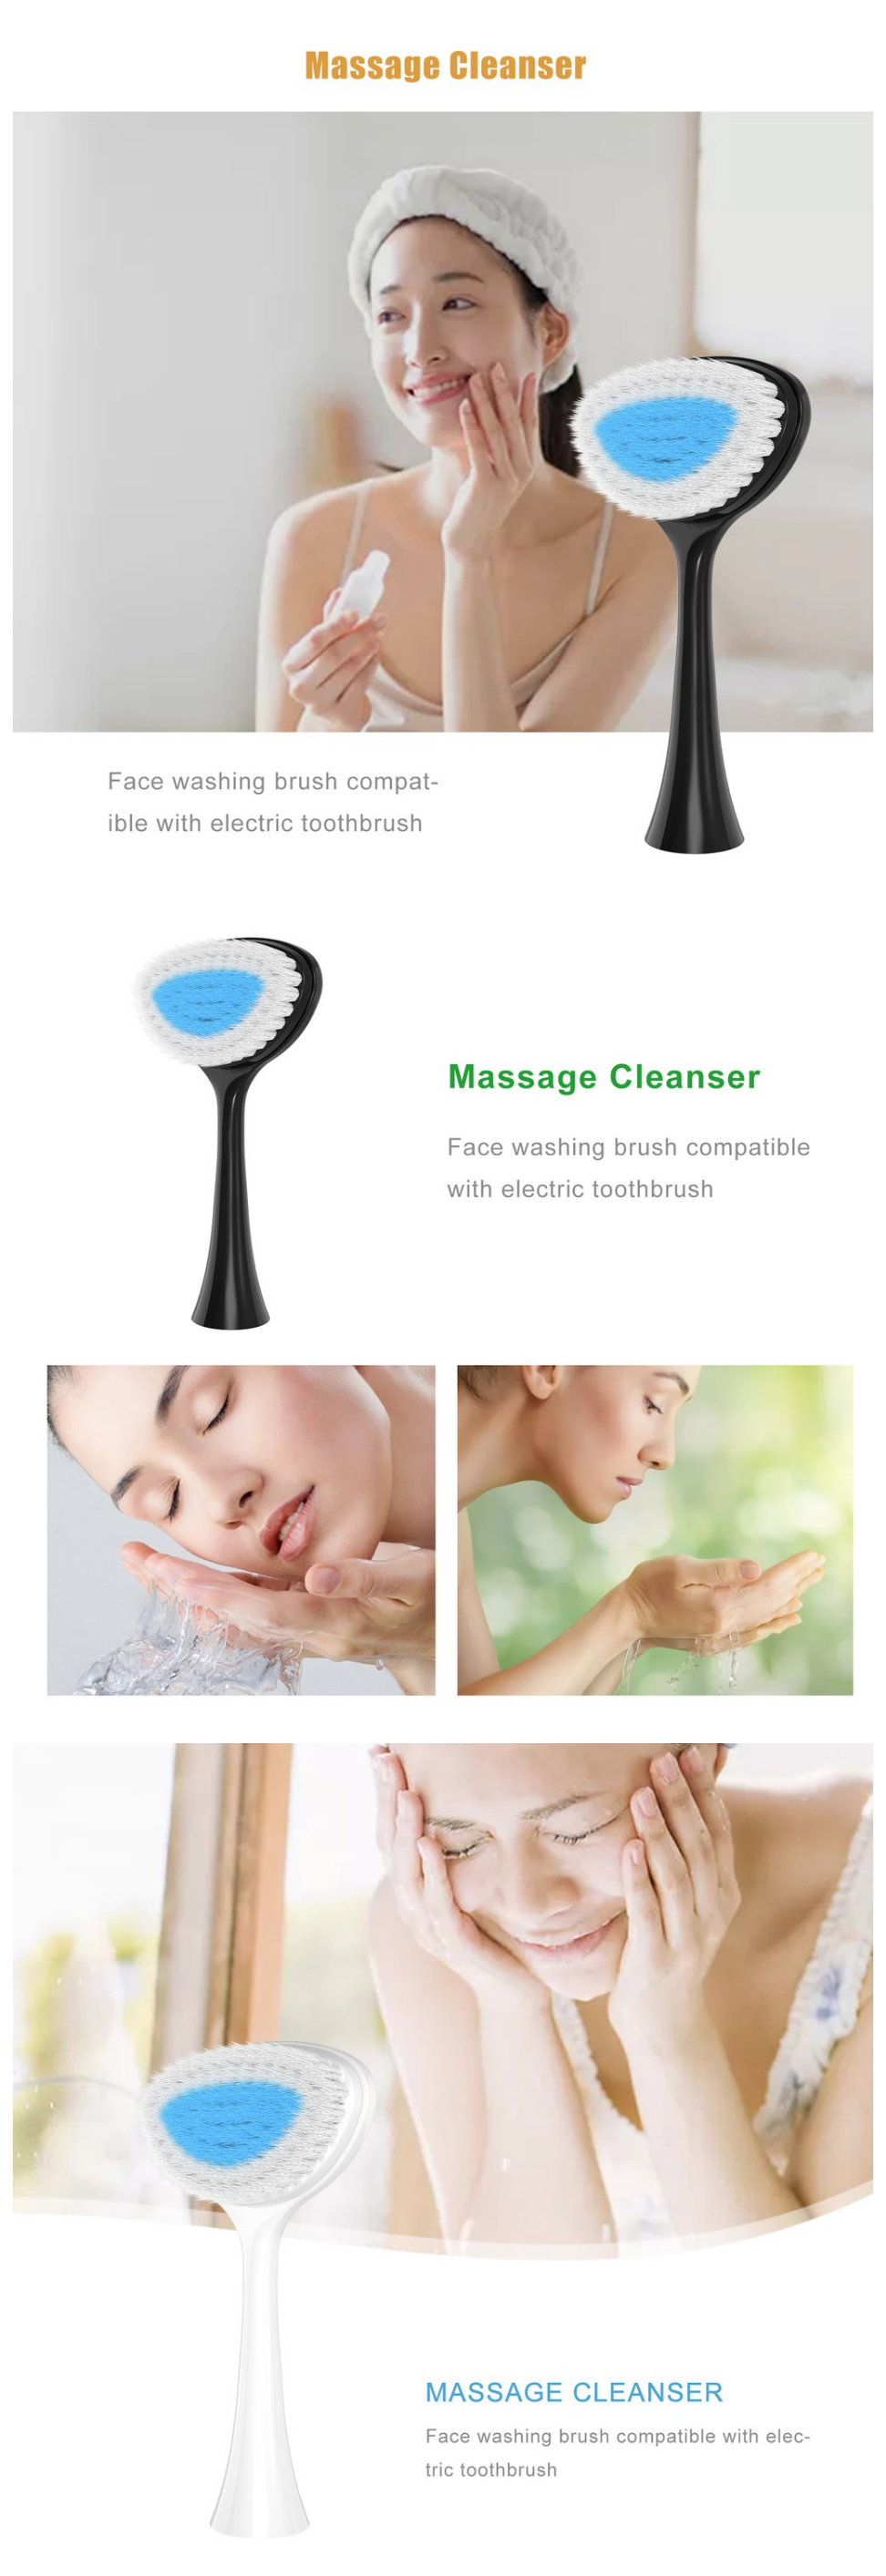 Alyson-6044-Face-Wash-Cleaning-Brush-Head-Wash-Brush-Massage-Cleaning-Instrument-For-SoocareDR-Bei-1615237-2